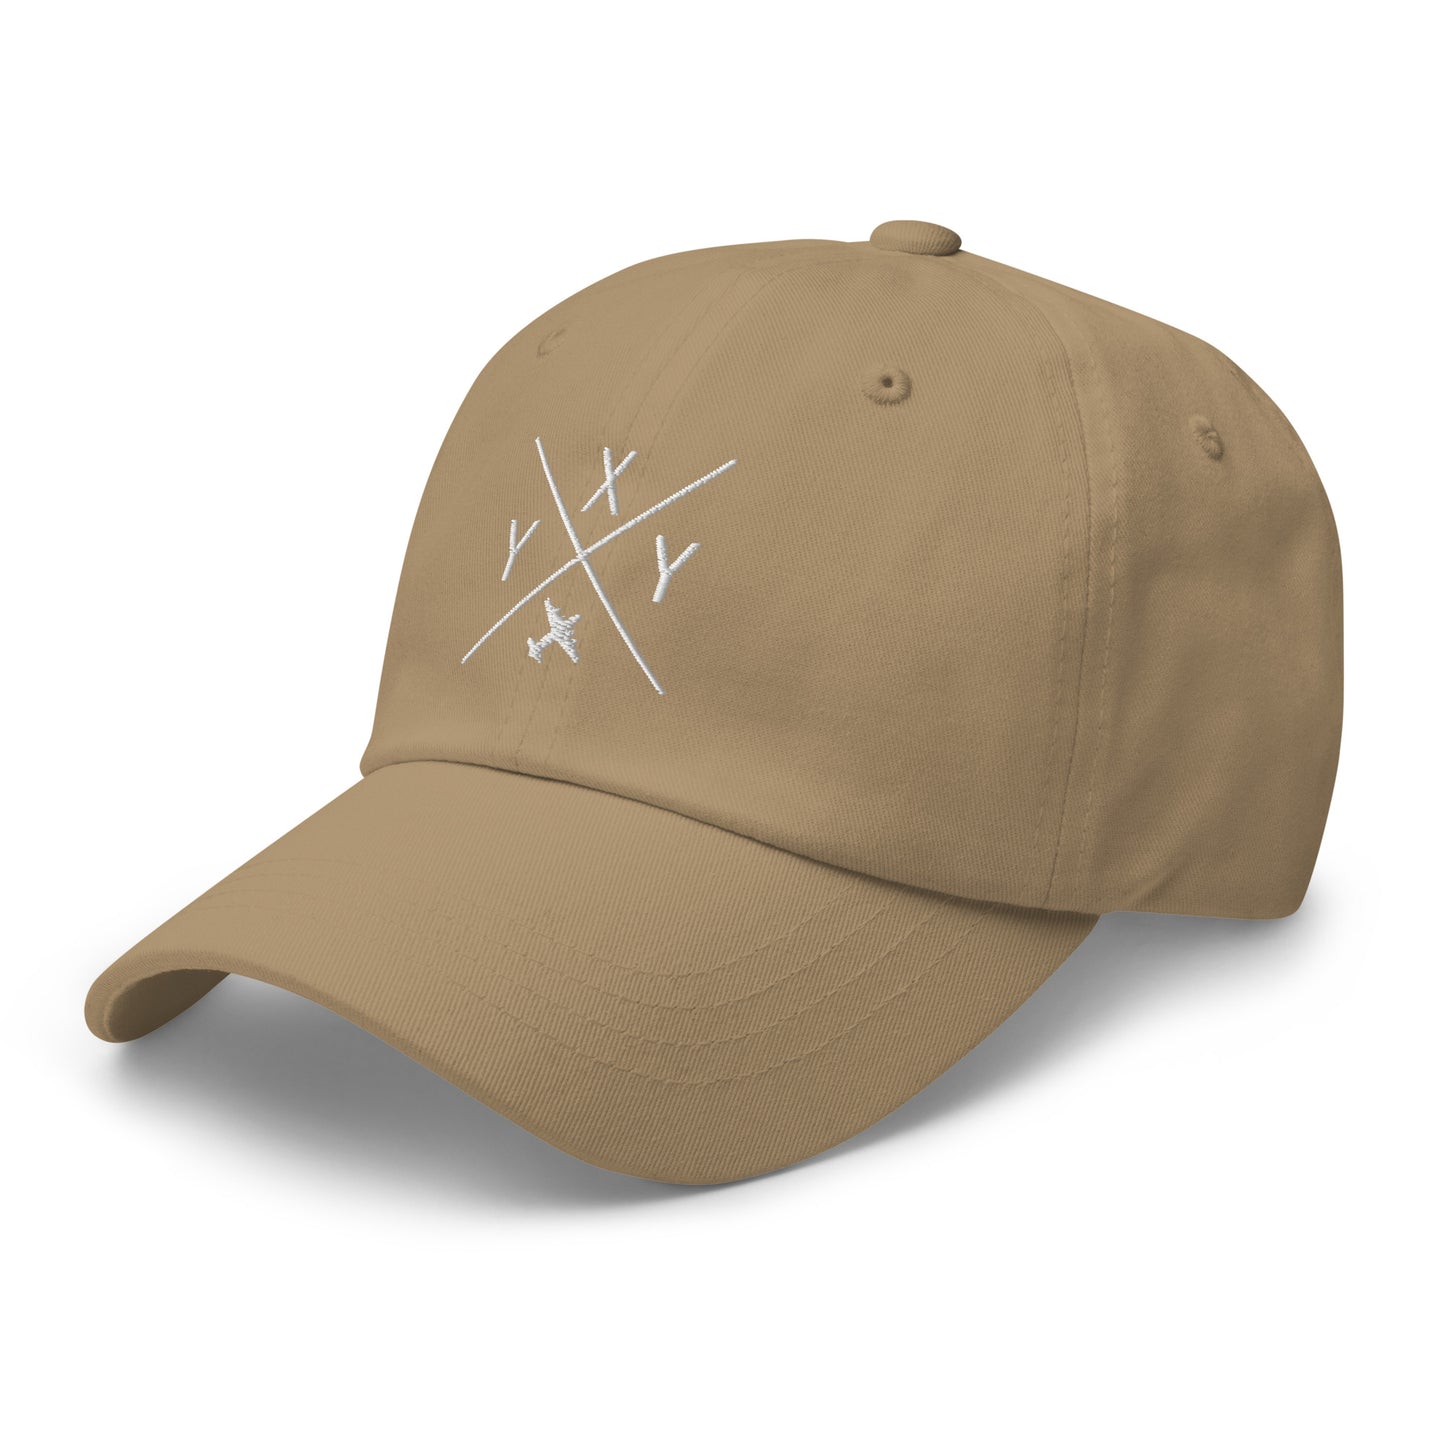 Crossed-X Dad Hat - White • YXY Whitehorse • YHM Designs - Image 17